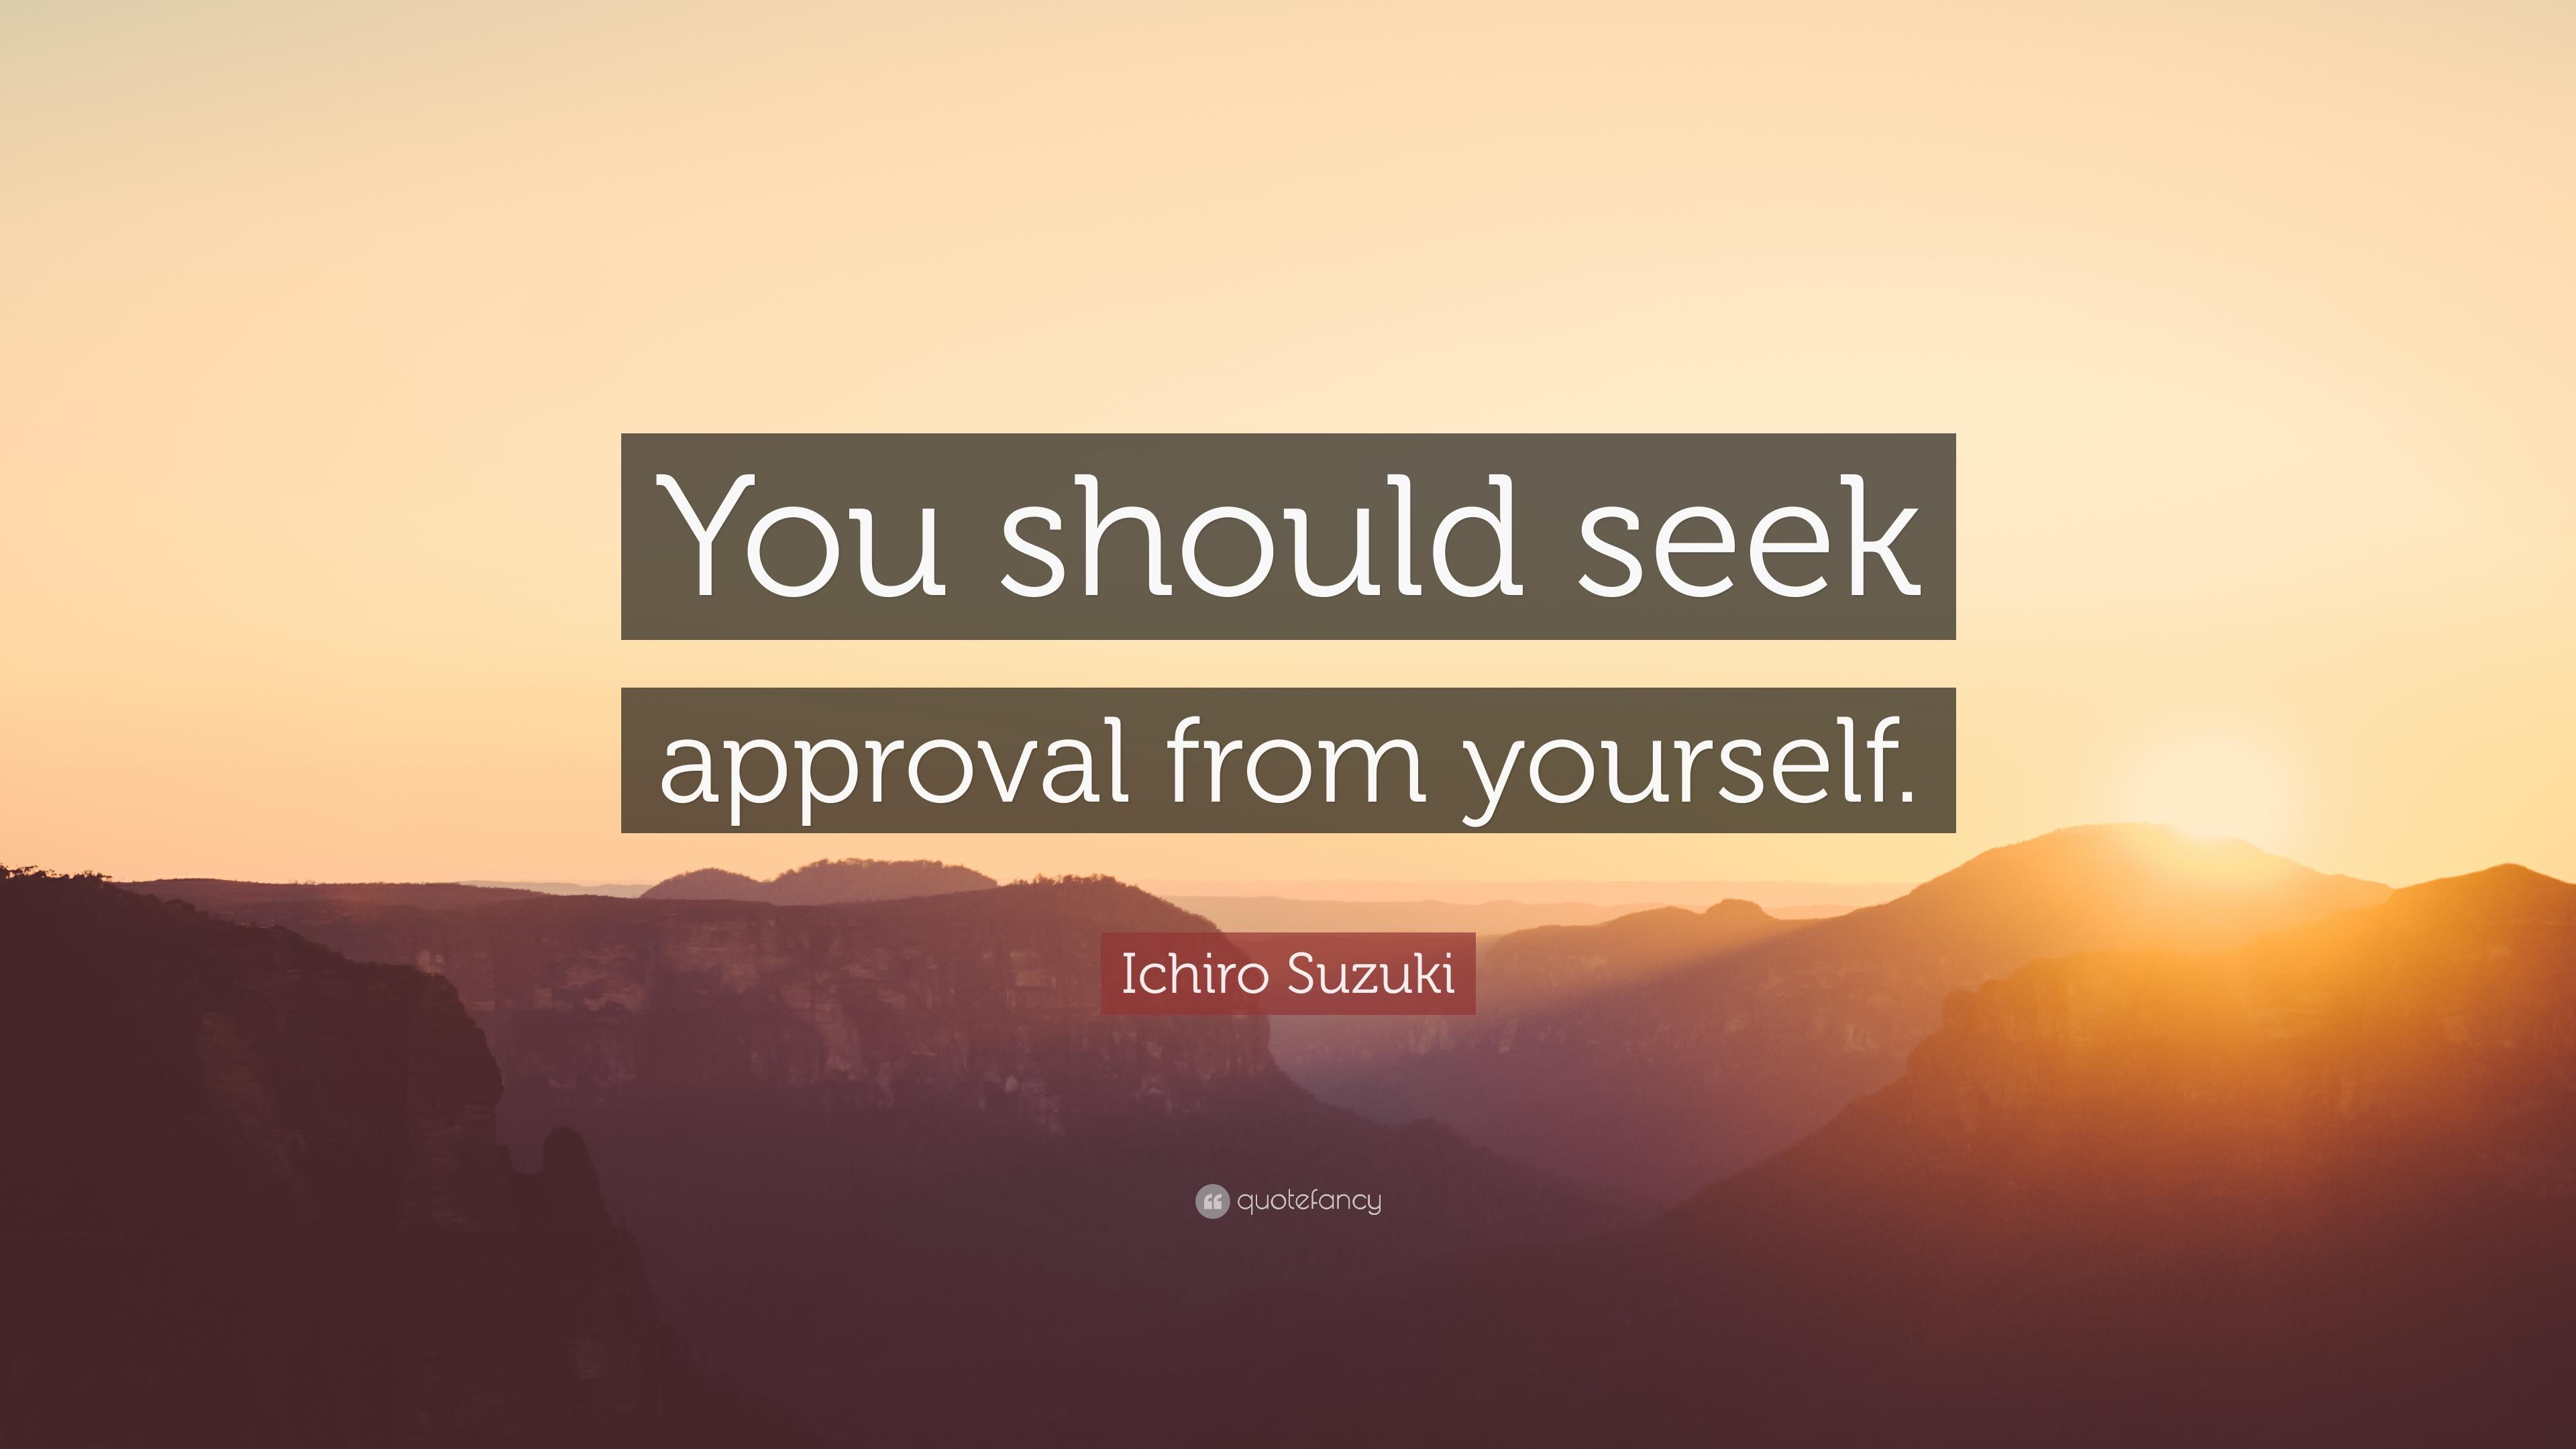 Ichiro Suzuki Quote: “You should seek approval from yourself.” 7